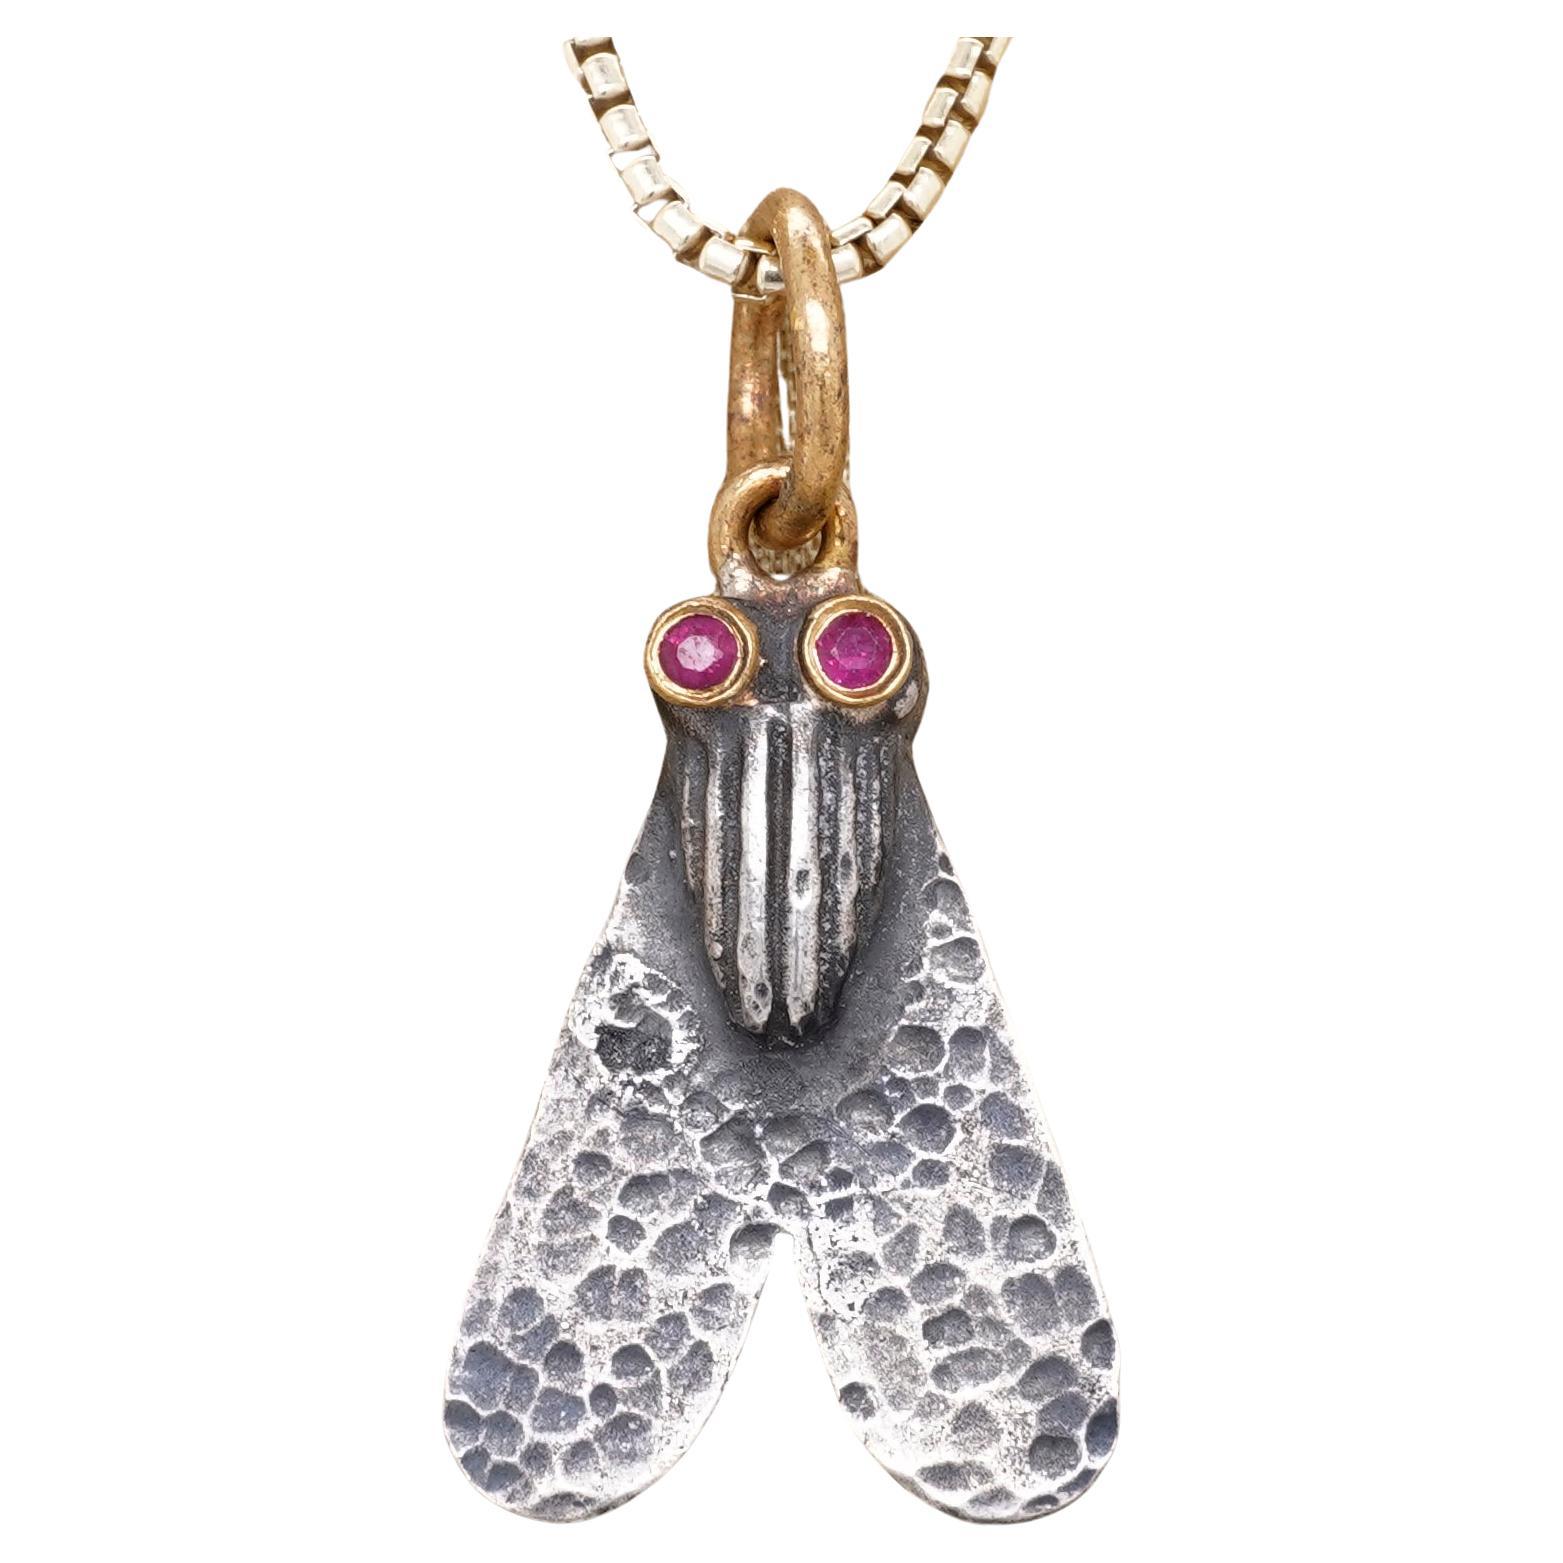 Contemporary Small, Ancient Fly with Ruby Eyes, Charm Pendant Necklace, 24kt Gold and Silver